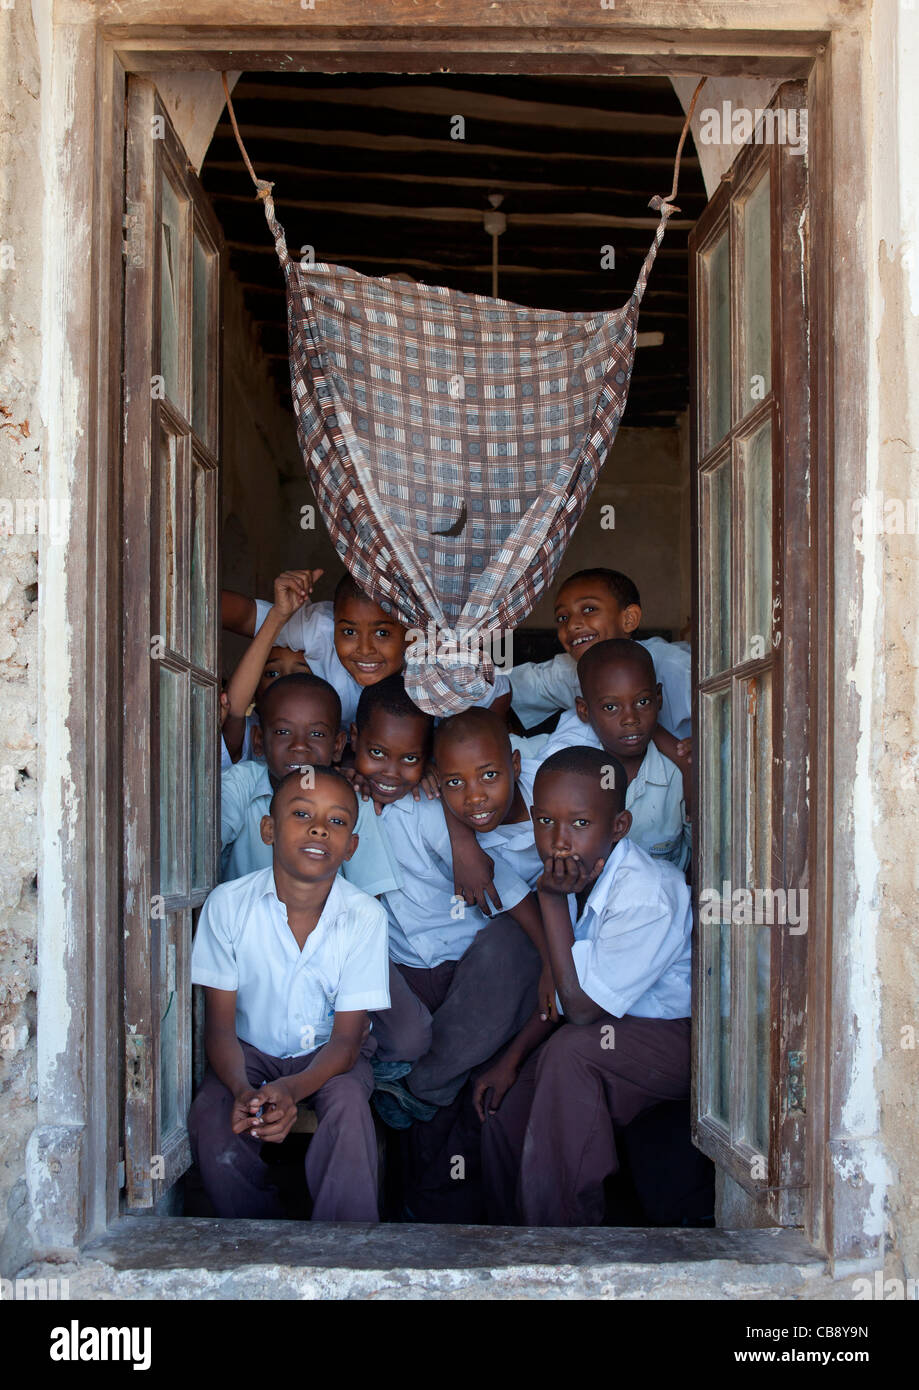 Group Of Schoolboys In The Frame Of The Classroom Stonetown Academy Lamu, Kenya Stock Photo